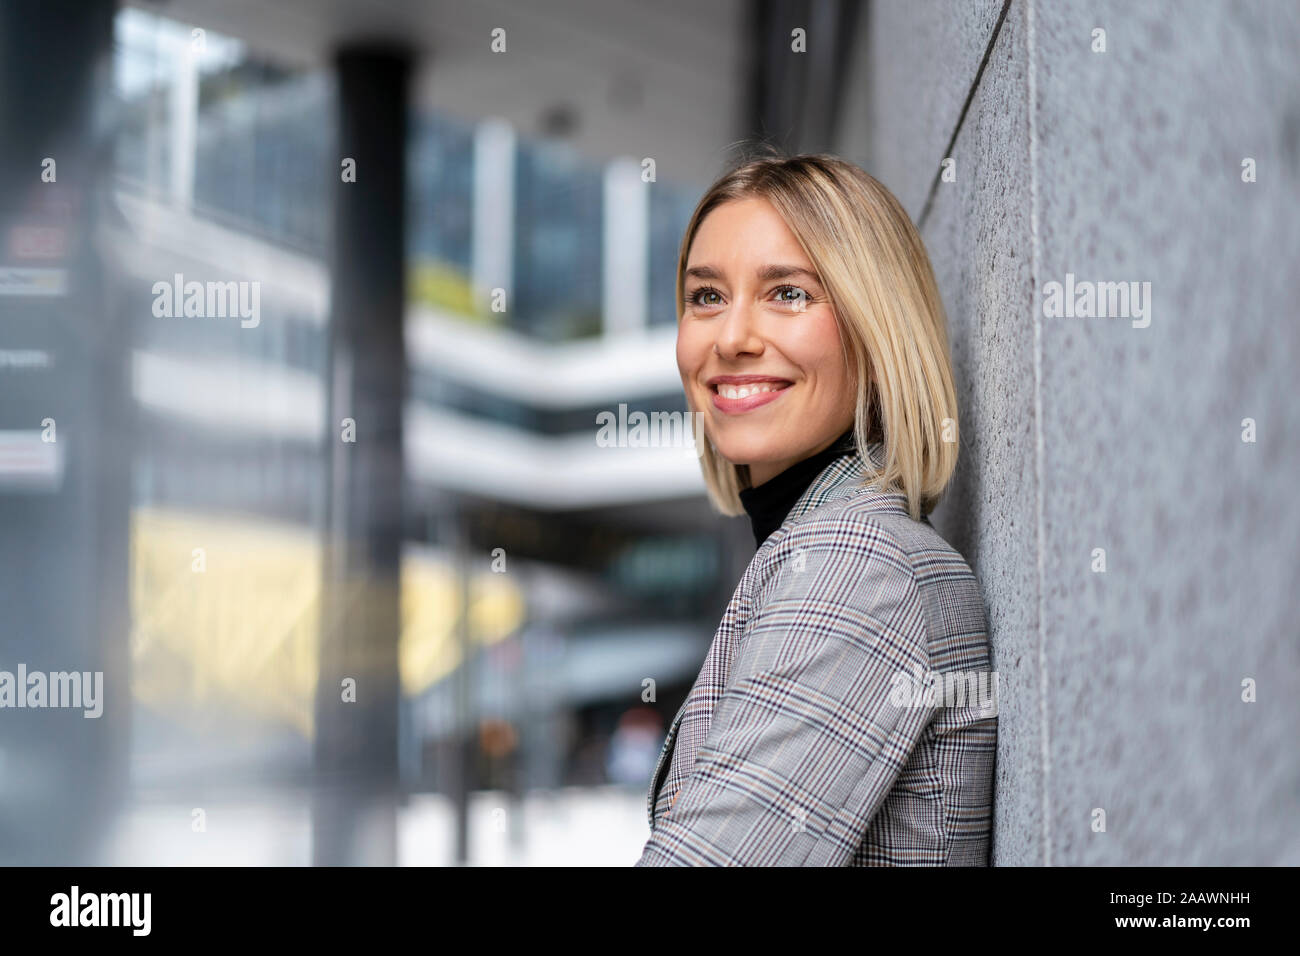 Portrait of smiling young businesswoman leaning against a wall Stock Photo